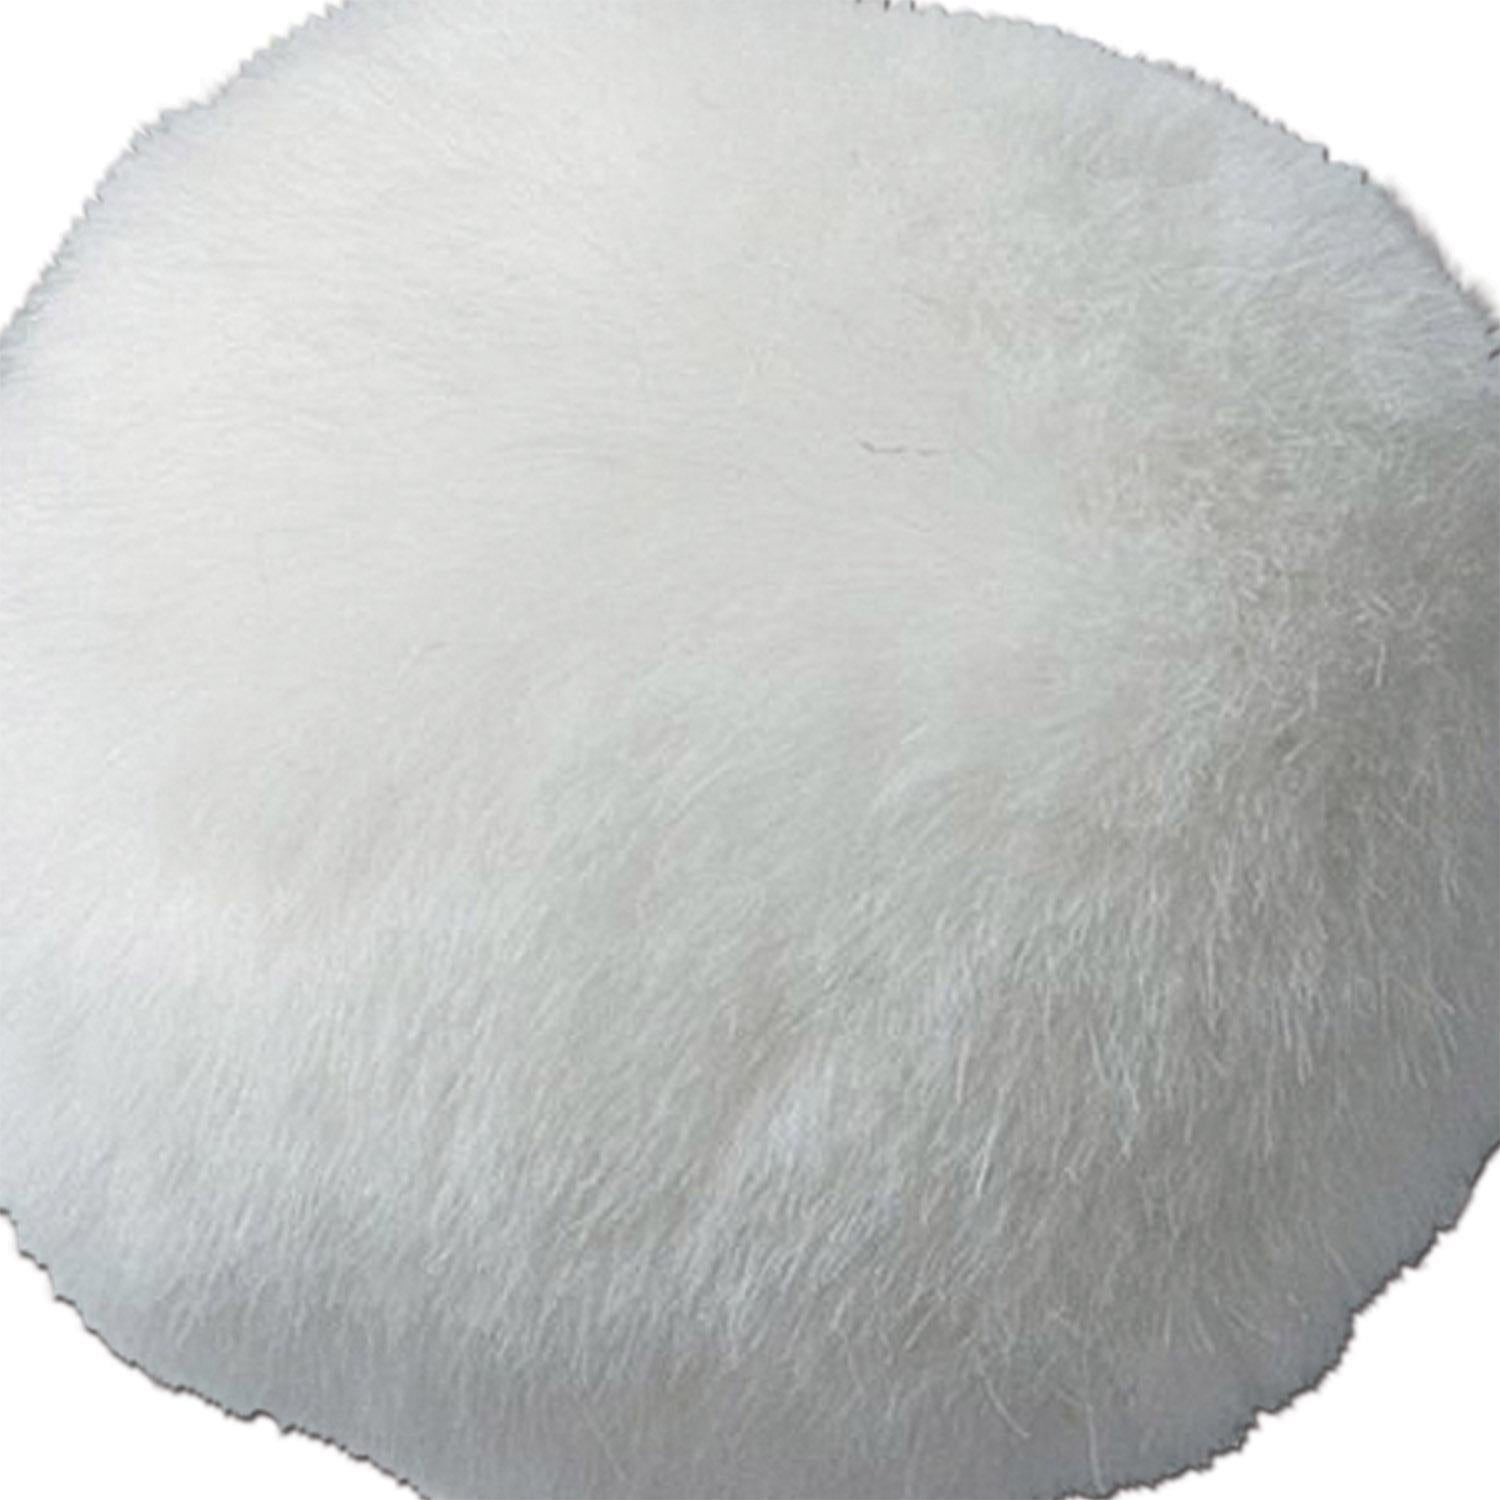 Beistle Easter Plush Bunny Tail